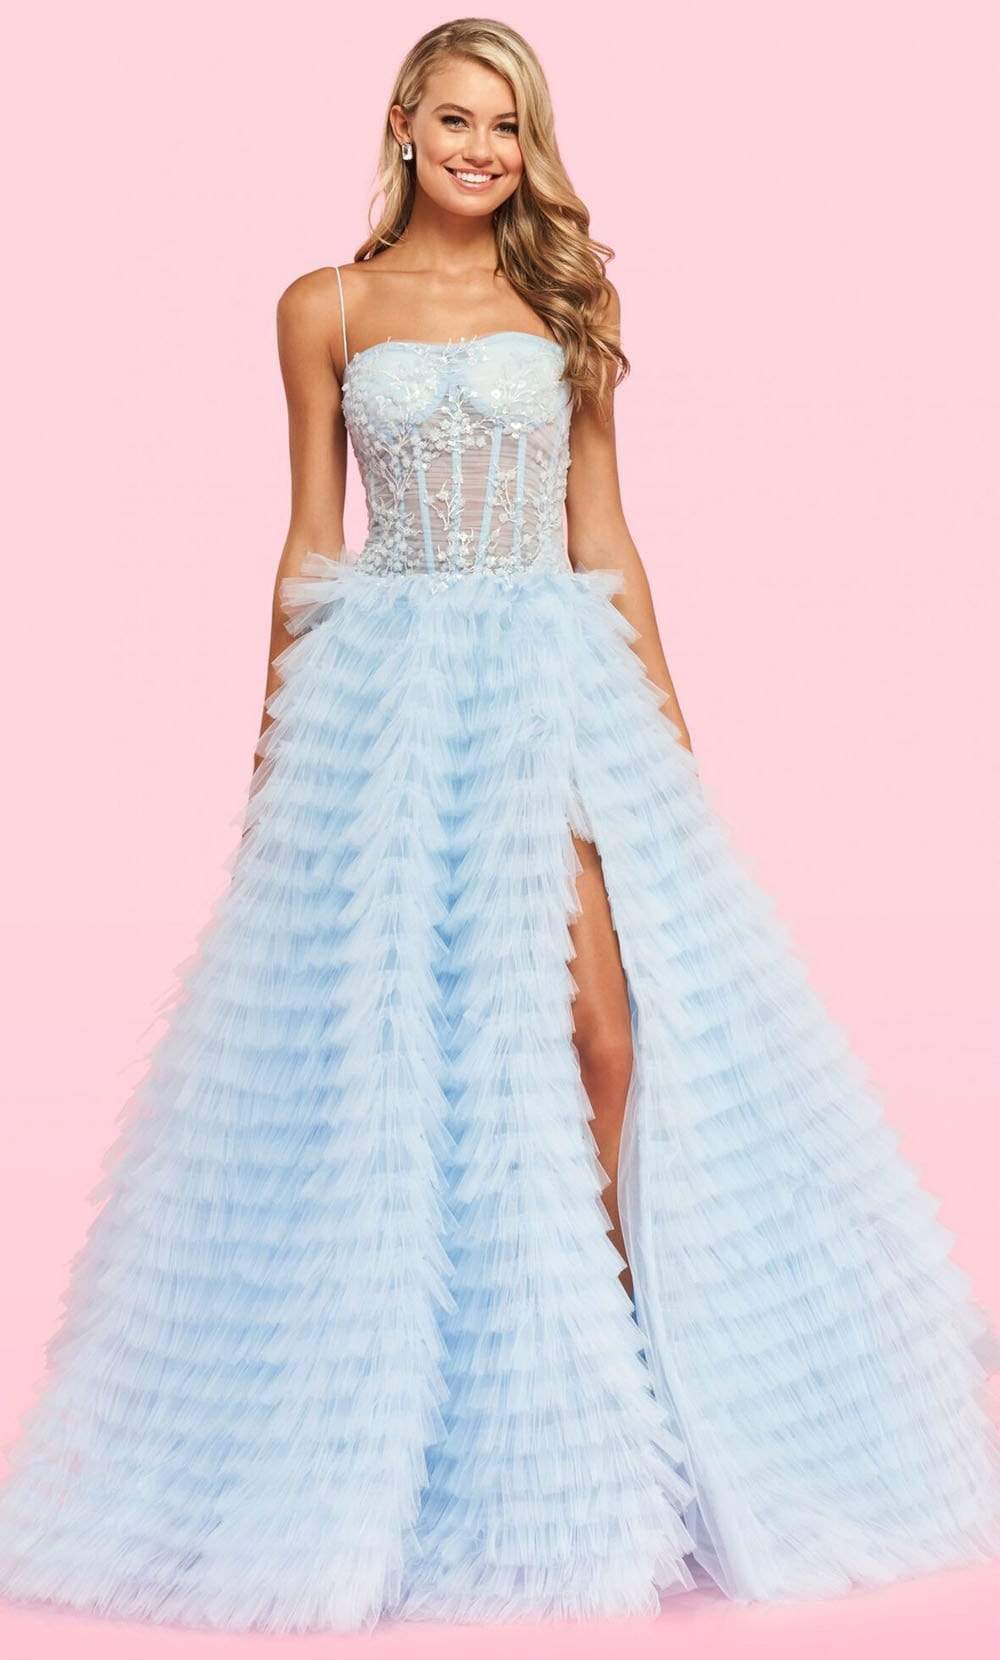 Image of Sherri Hill - 54189 Sheer Bodice Tiered Tulle High Slit Ballgown